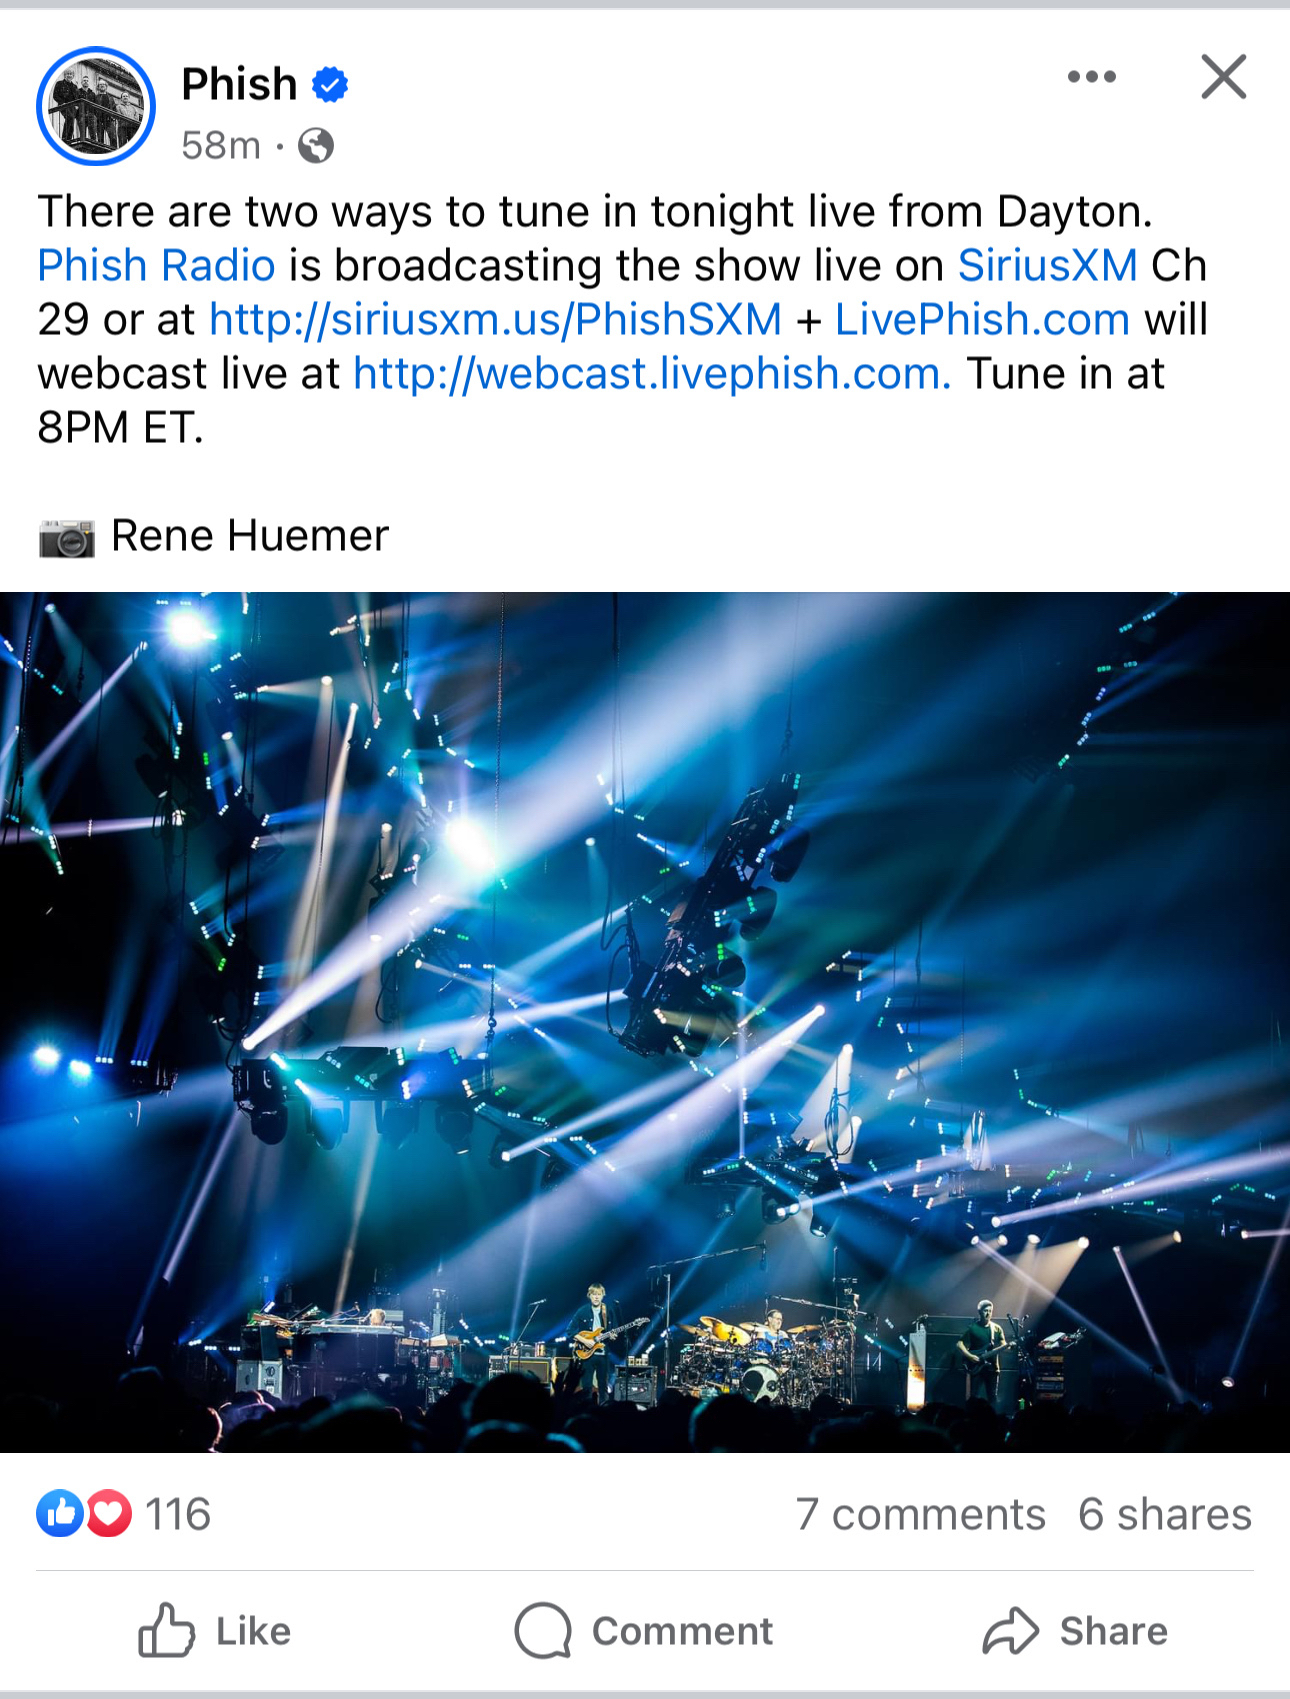 There are two ways to tune in tonight live from Dayton.&10;Phish Radio is broadcasting the show live on SiriusXM Ch 29 or at http://siriusxm.us/PhishSXM + LivePhish.com will&10;webcast live at http://webcast.livephish.com.Tune in at&10;8PM ET.